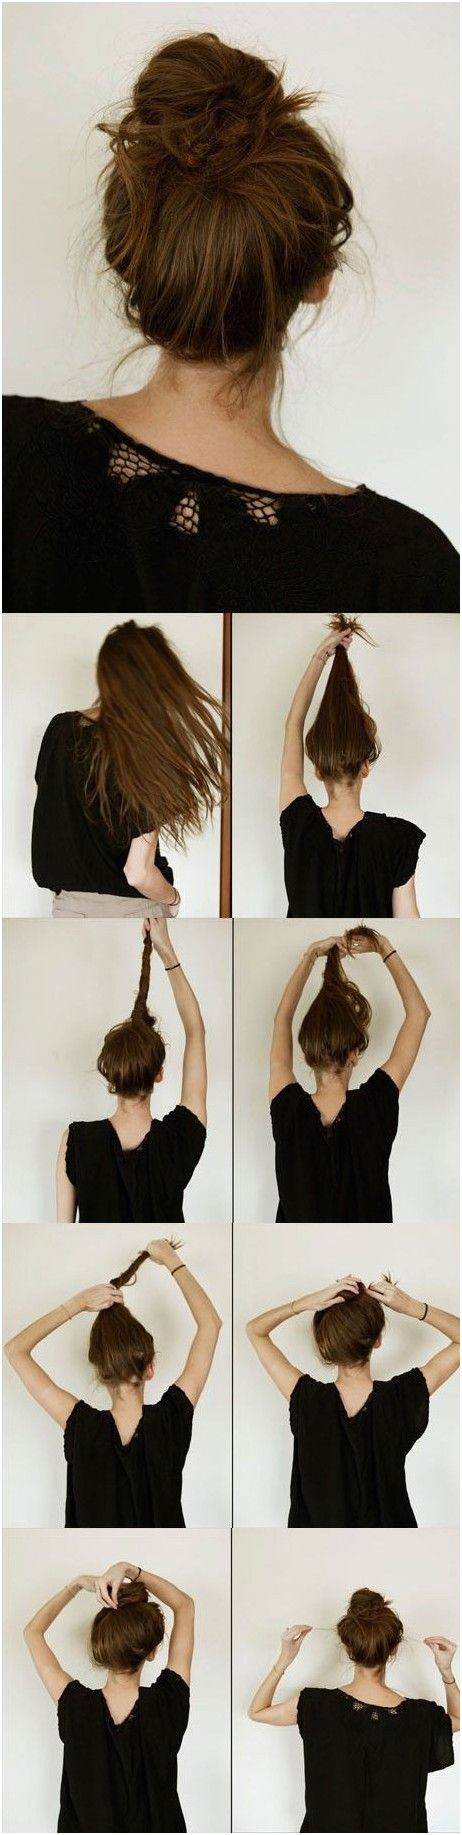 Long hairstyles look charming and Besides it is versatile when it es to styling It can be styled into a simple high ponytail or cute bow